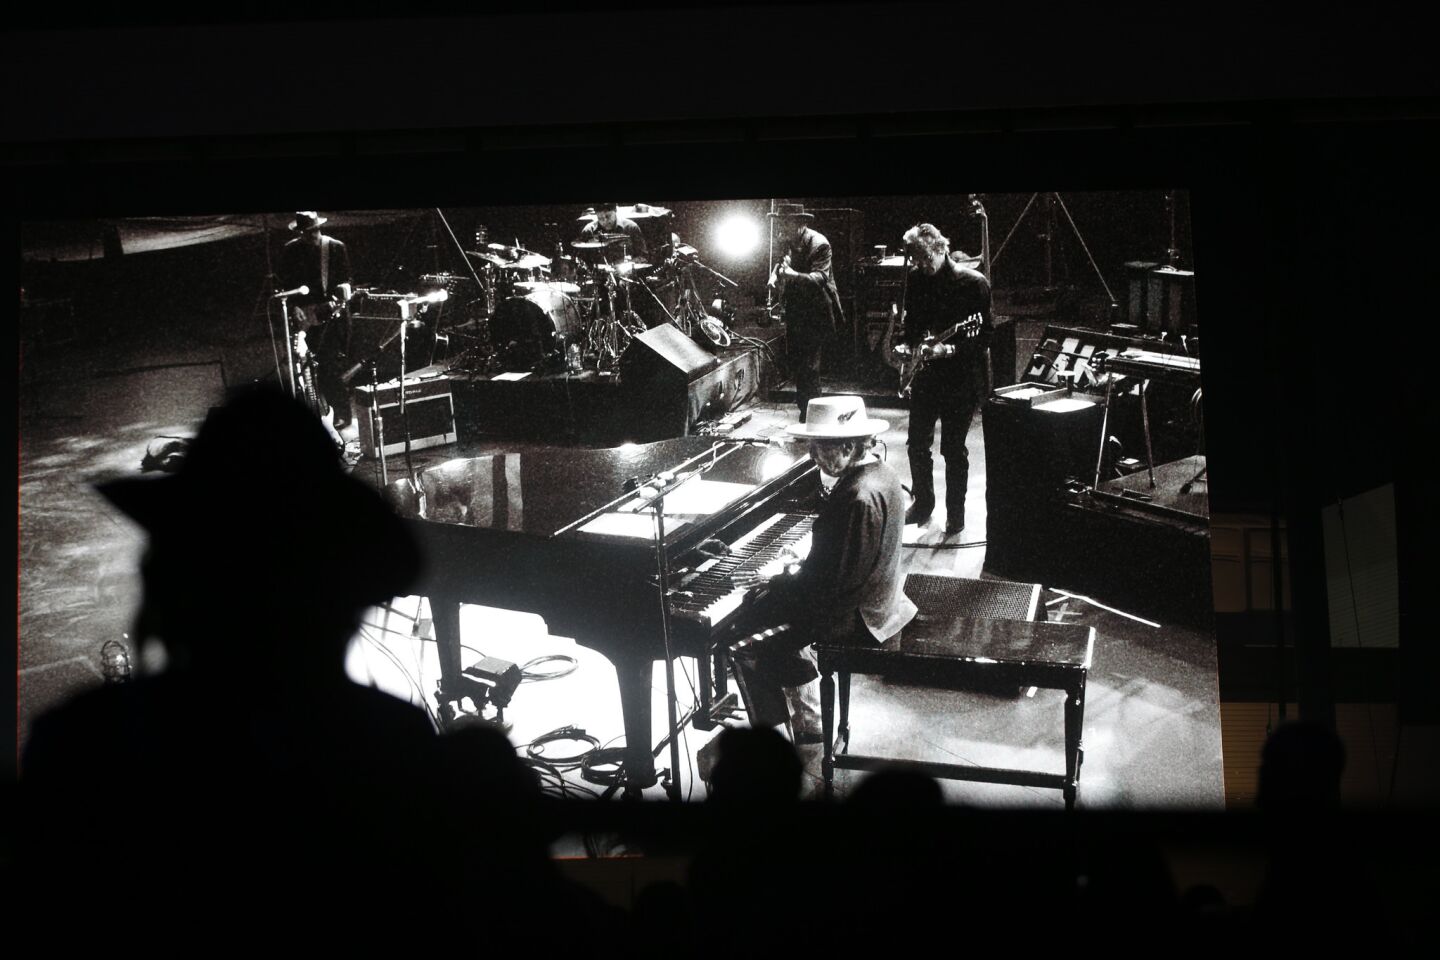 Bob Dylan (at the piano) did not want press photos taken during his set, but promoter Goldenvoice allowed photos of the screen.